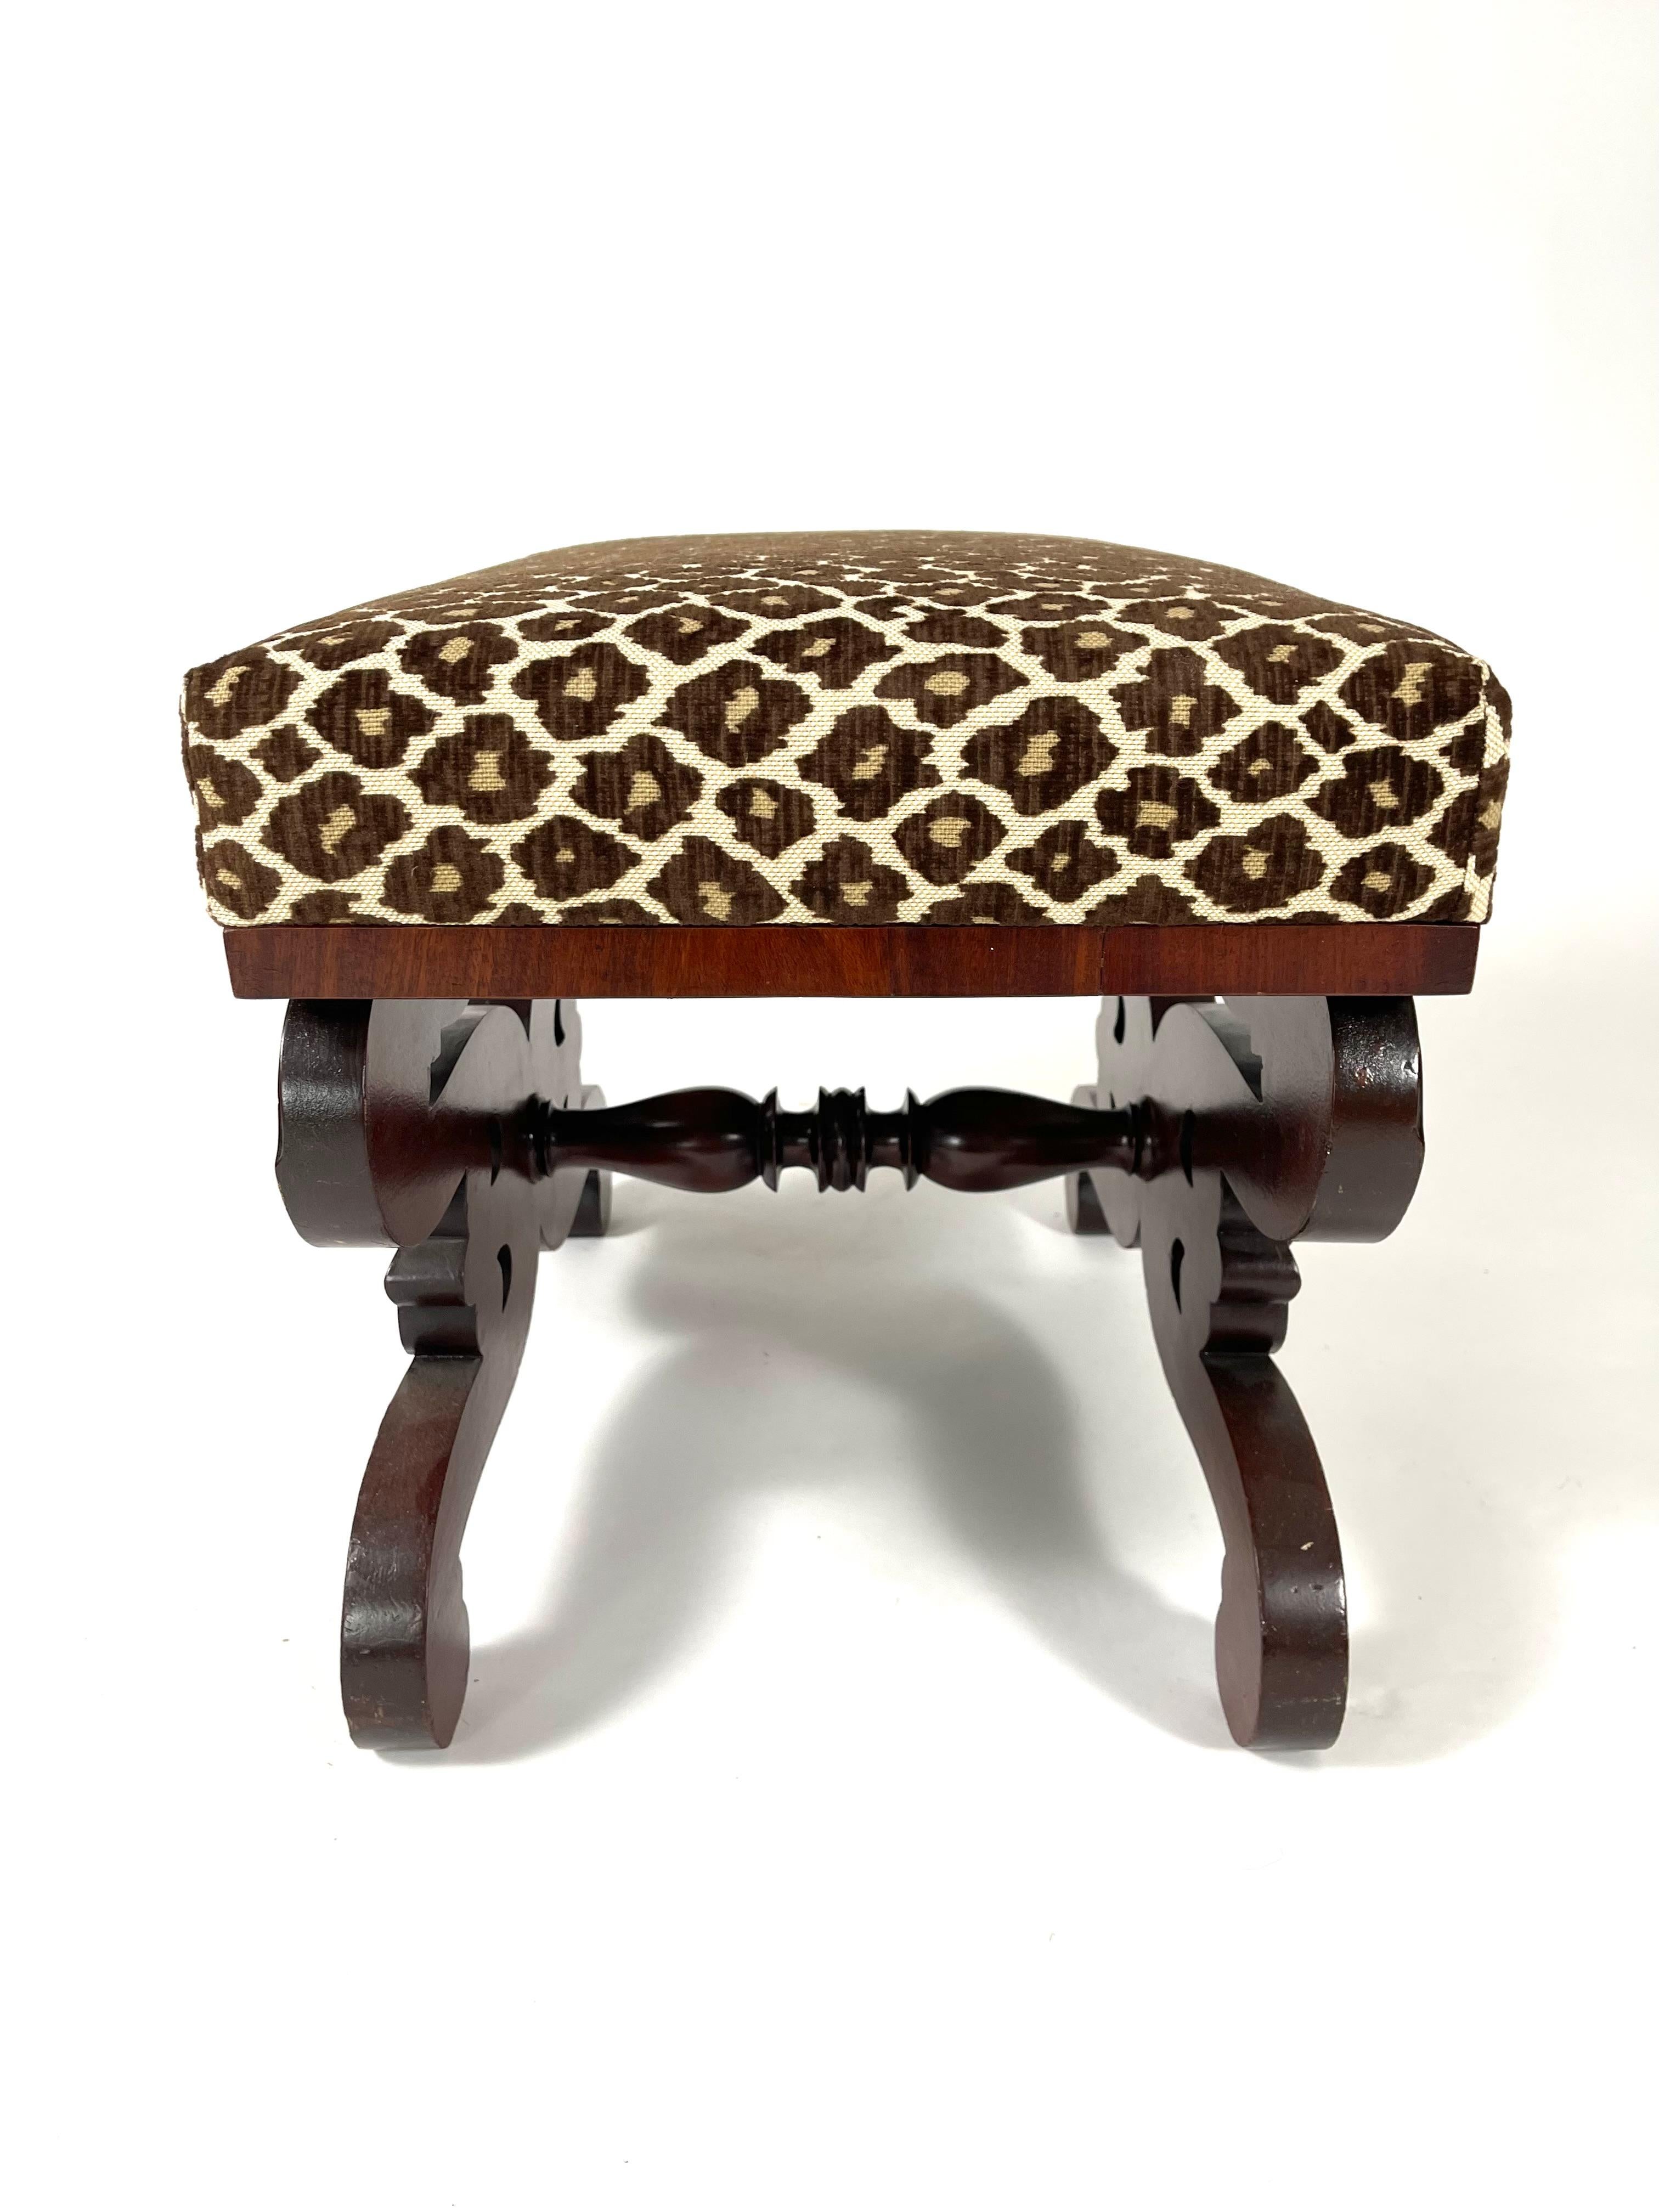 Neoclassical Classical Carved Mahogany Upholstered Foot Stool Ottoman For Sale